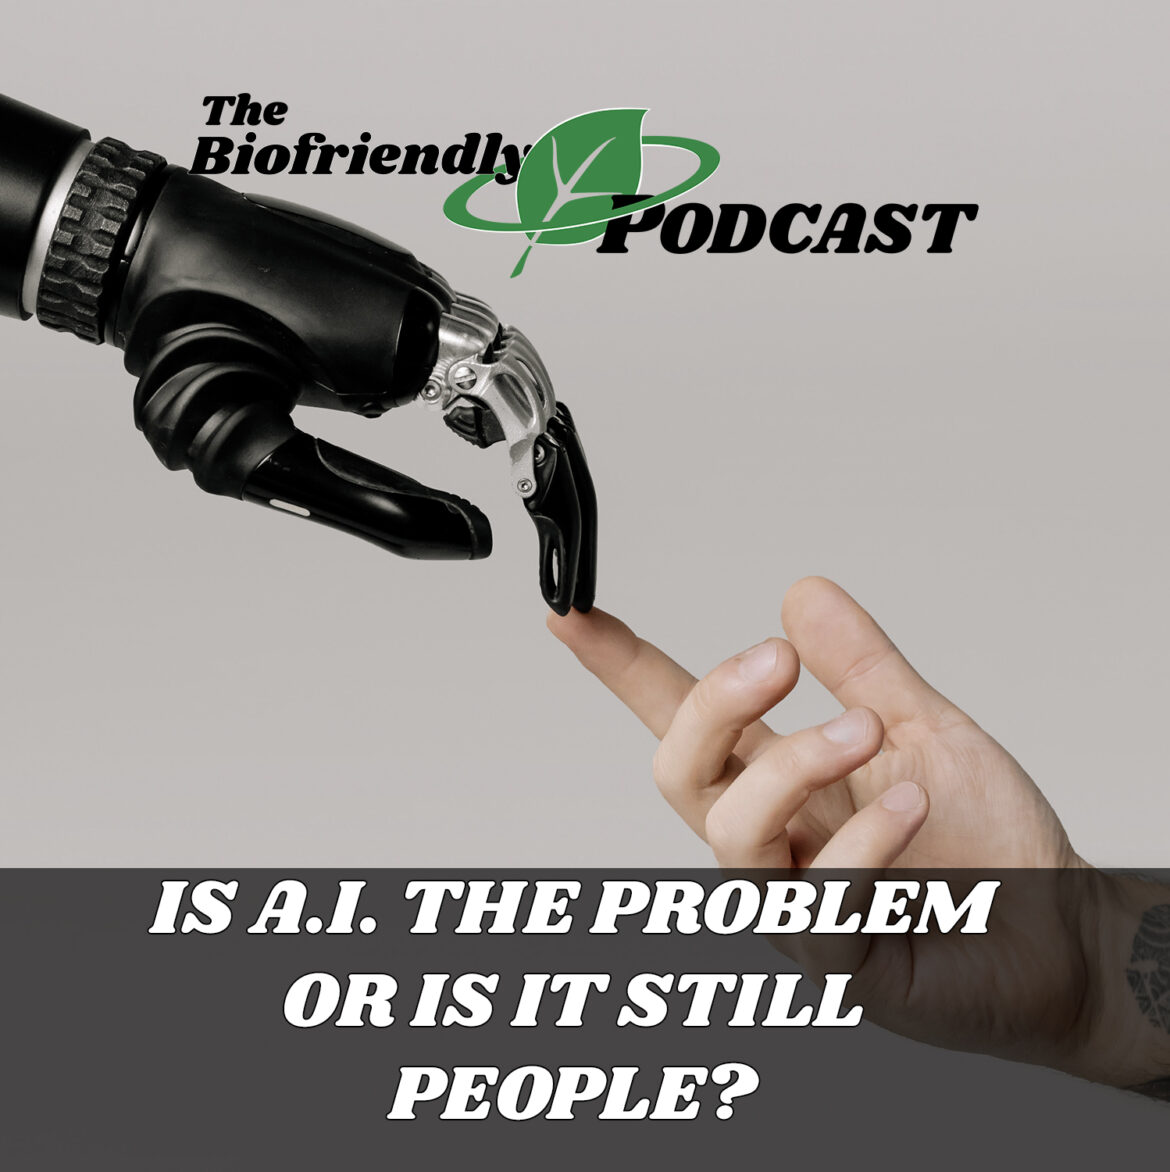 Is A.I. the Problem or Is It Still People?